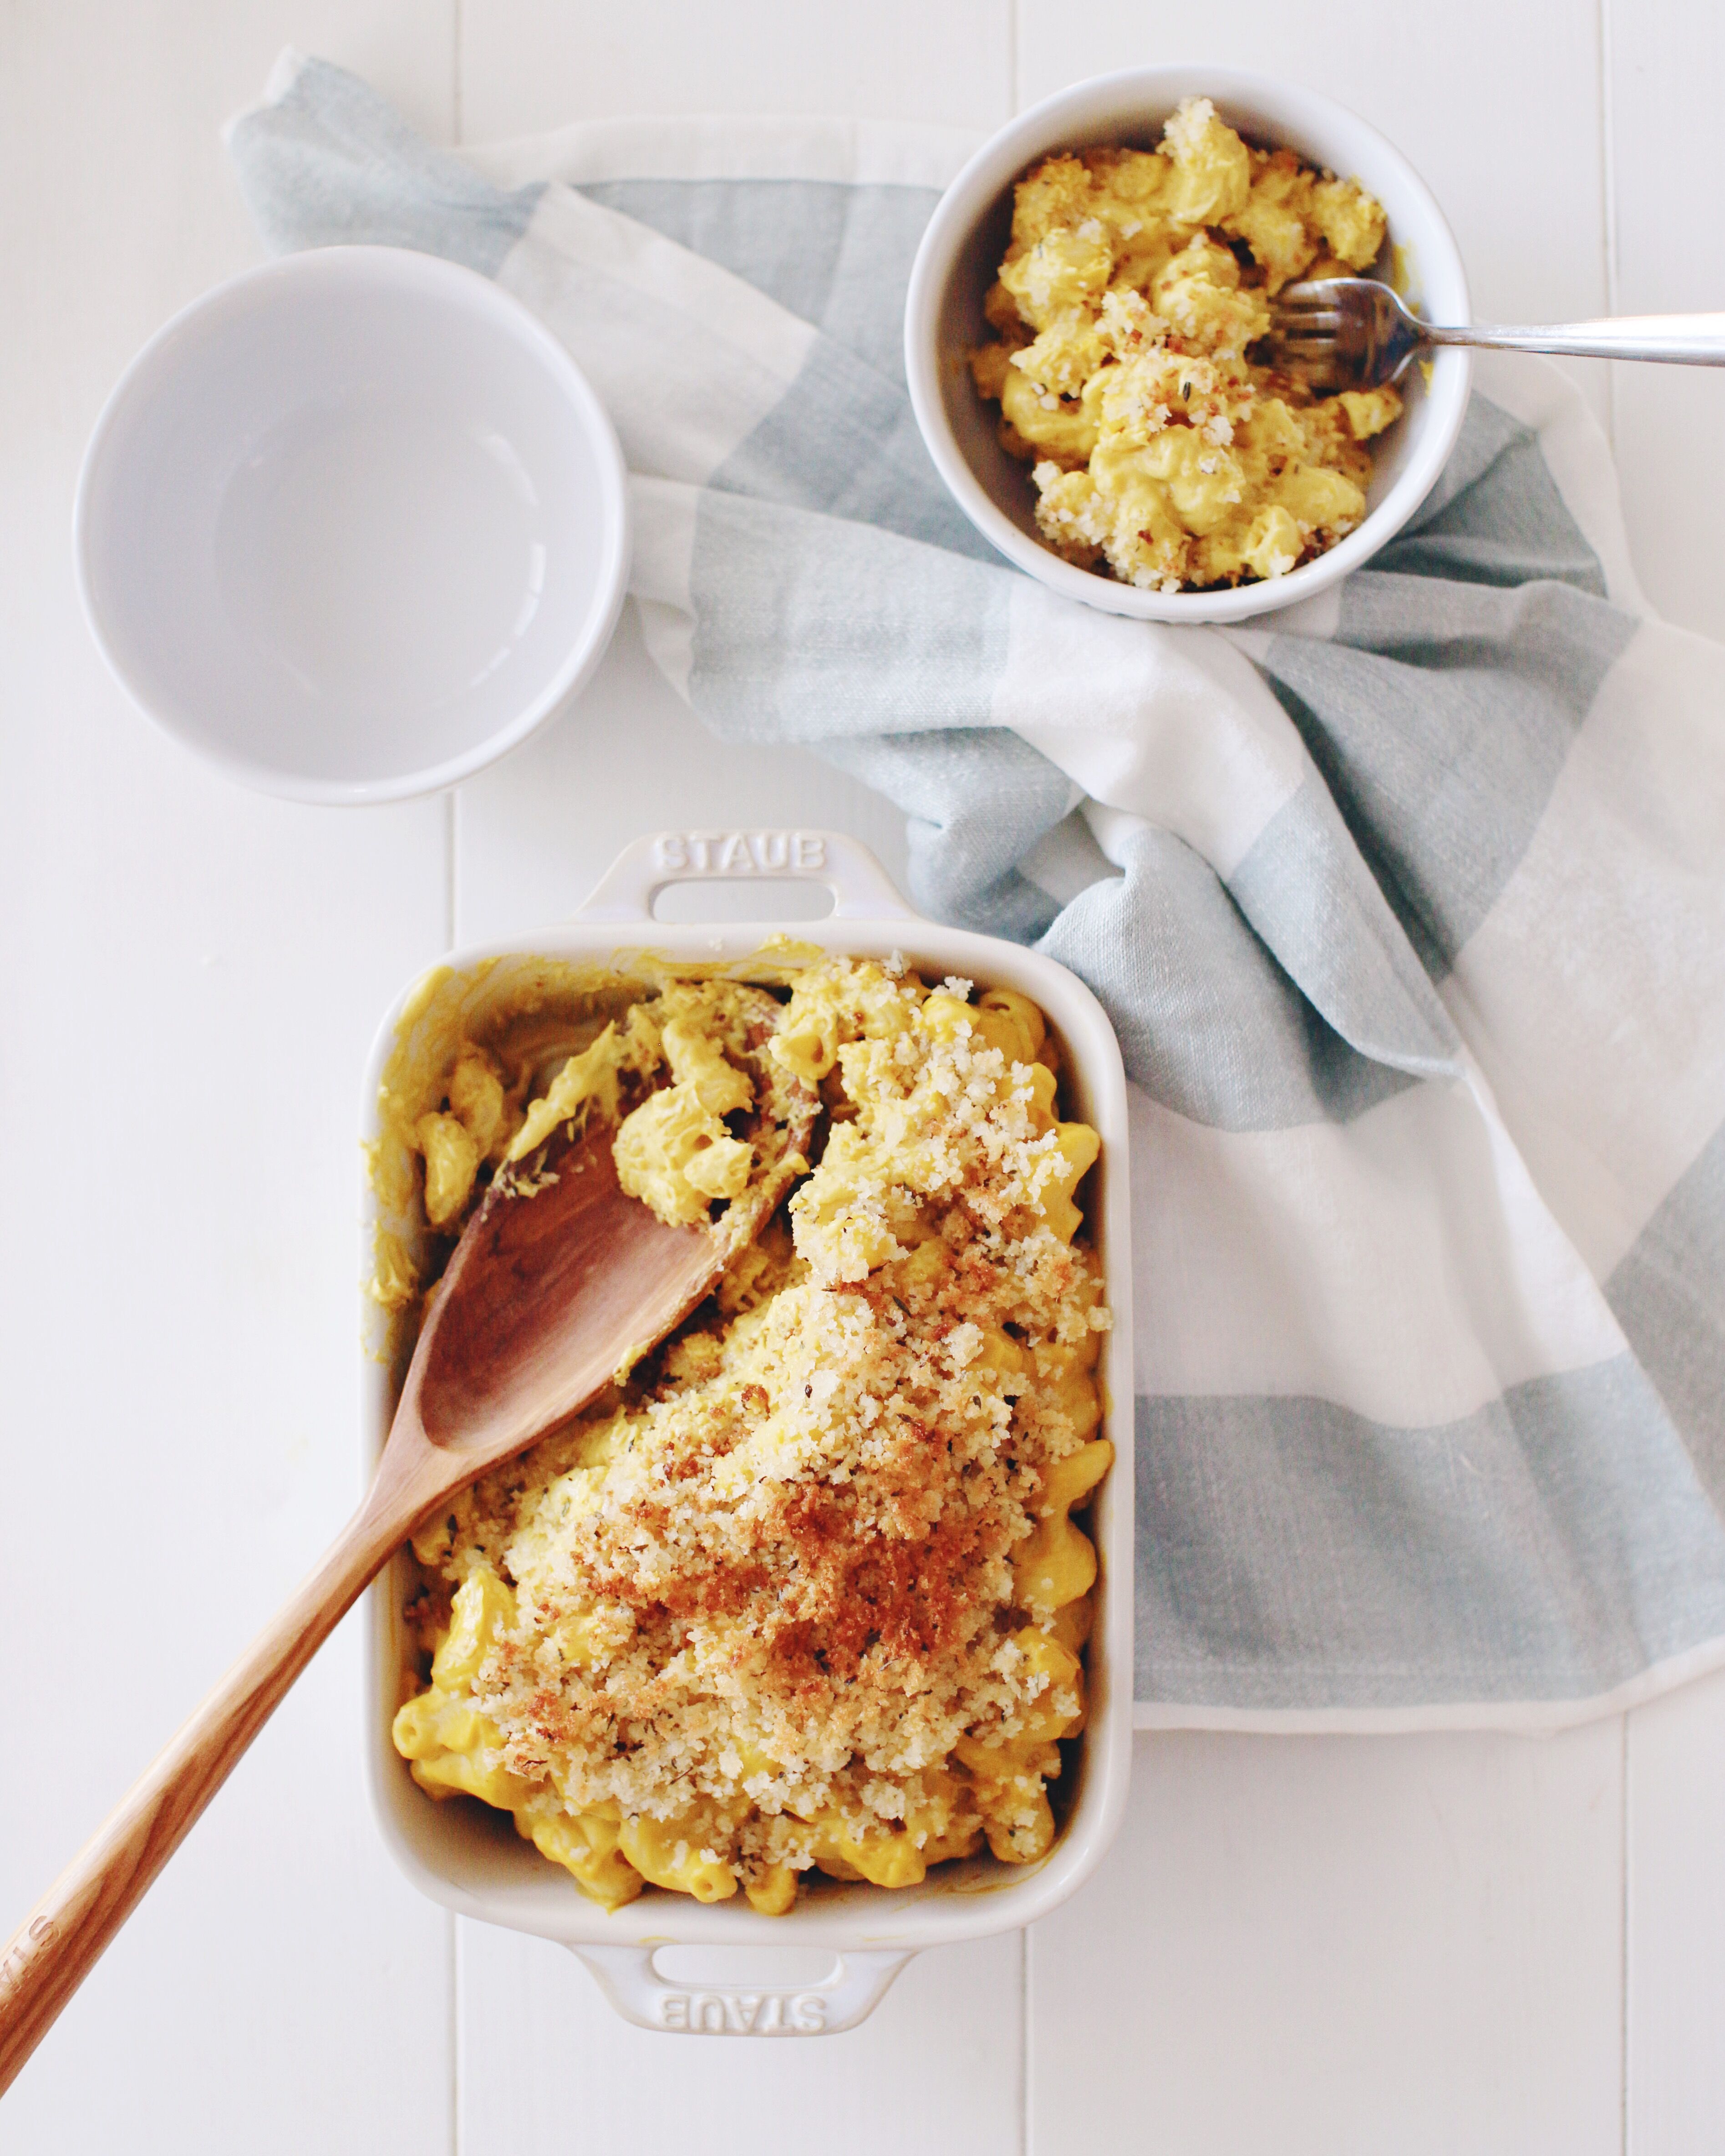 Vegan Mac n' cheese made with butternut squash, caramelized onions and cashews that is totally to die for - designed by a dietitian and so much more nutritious than regular Mac n cheese!